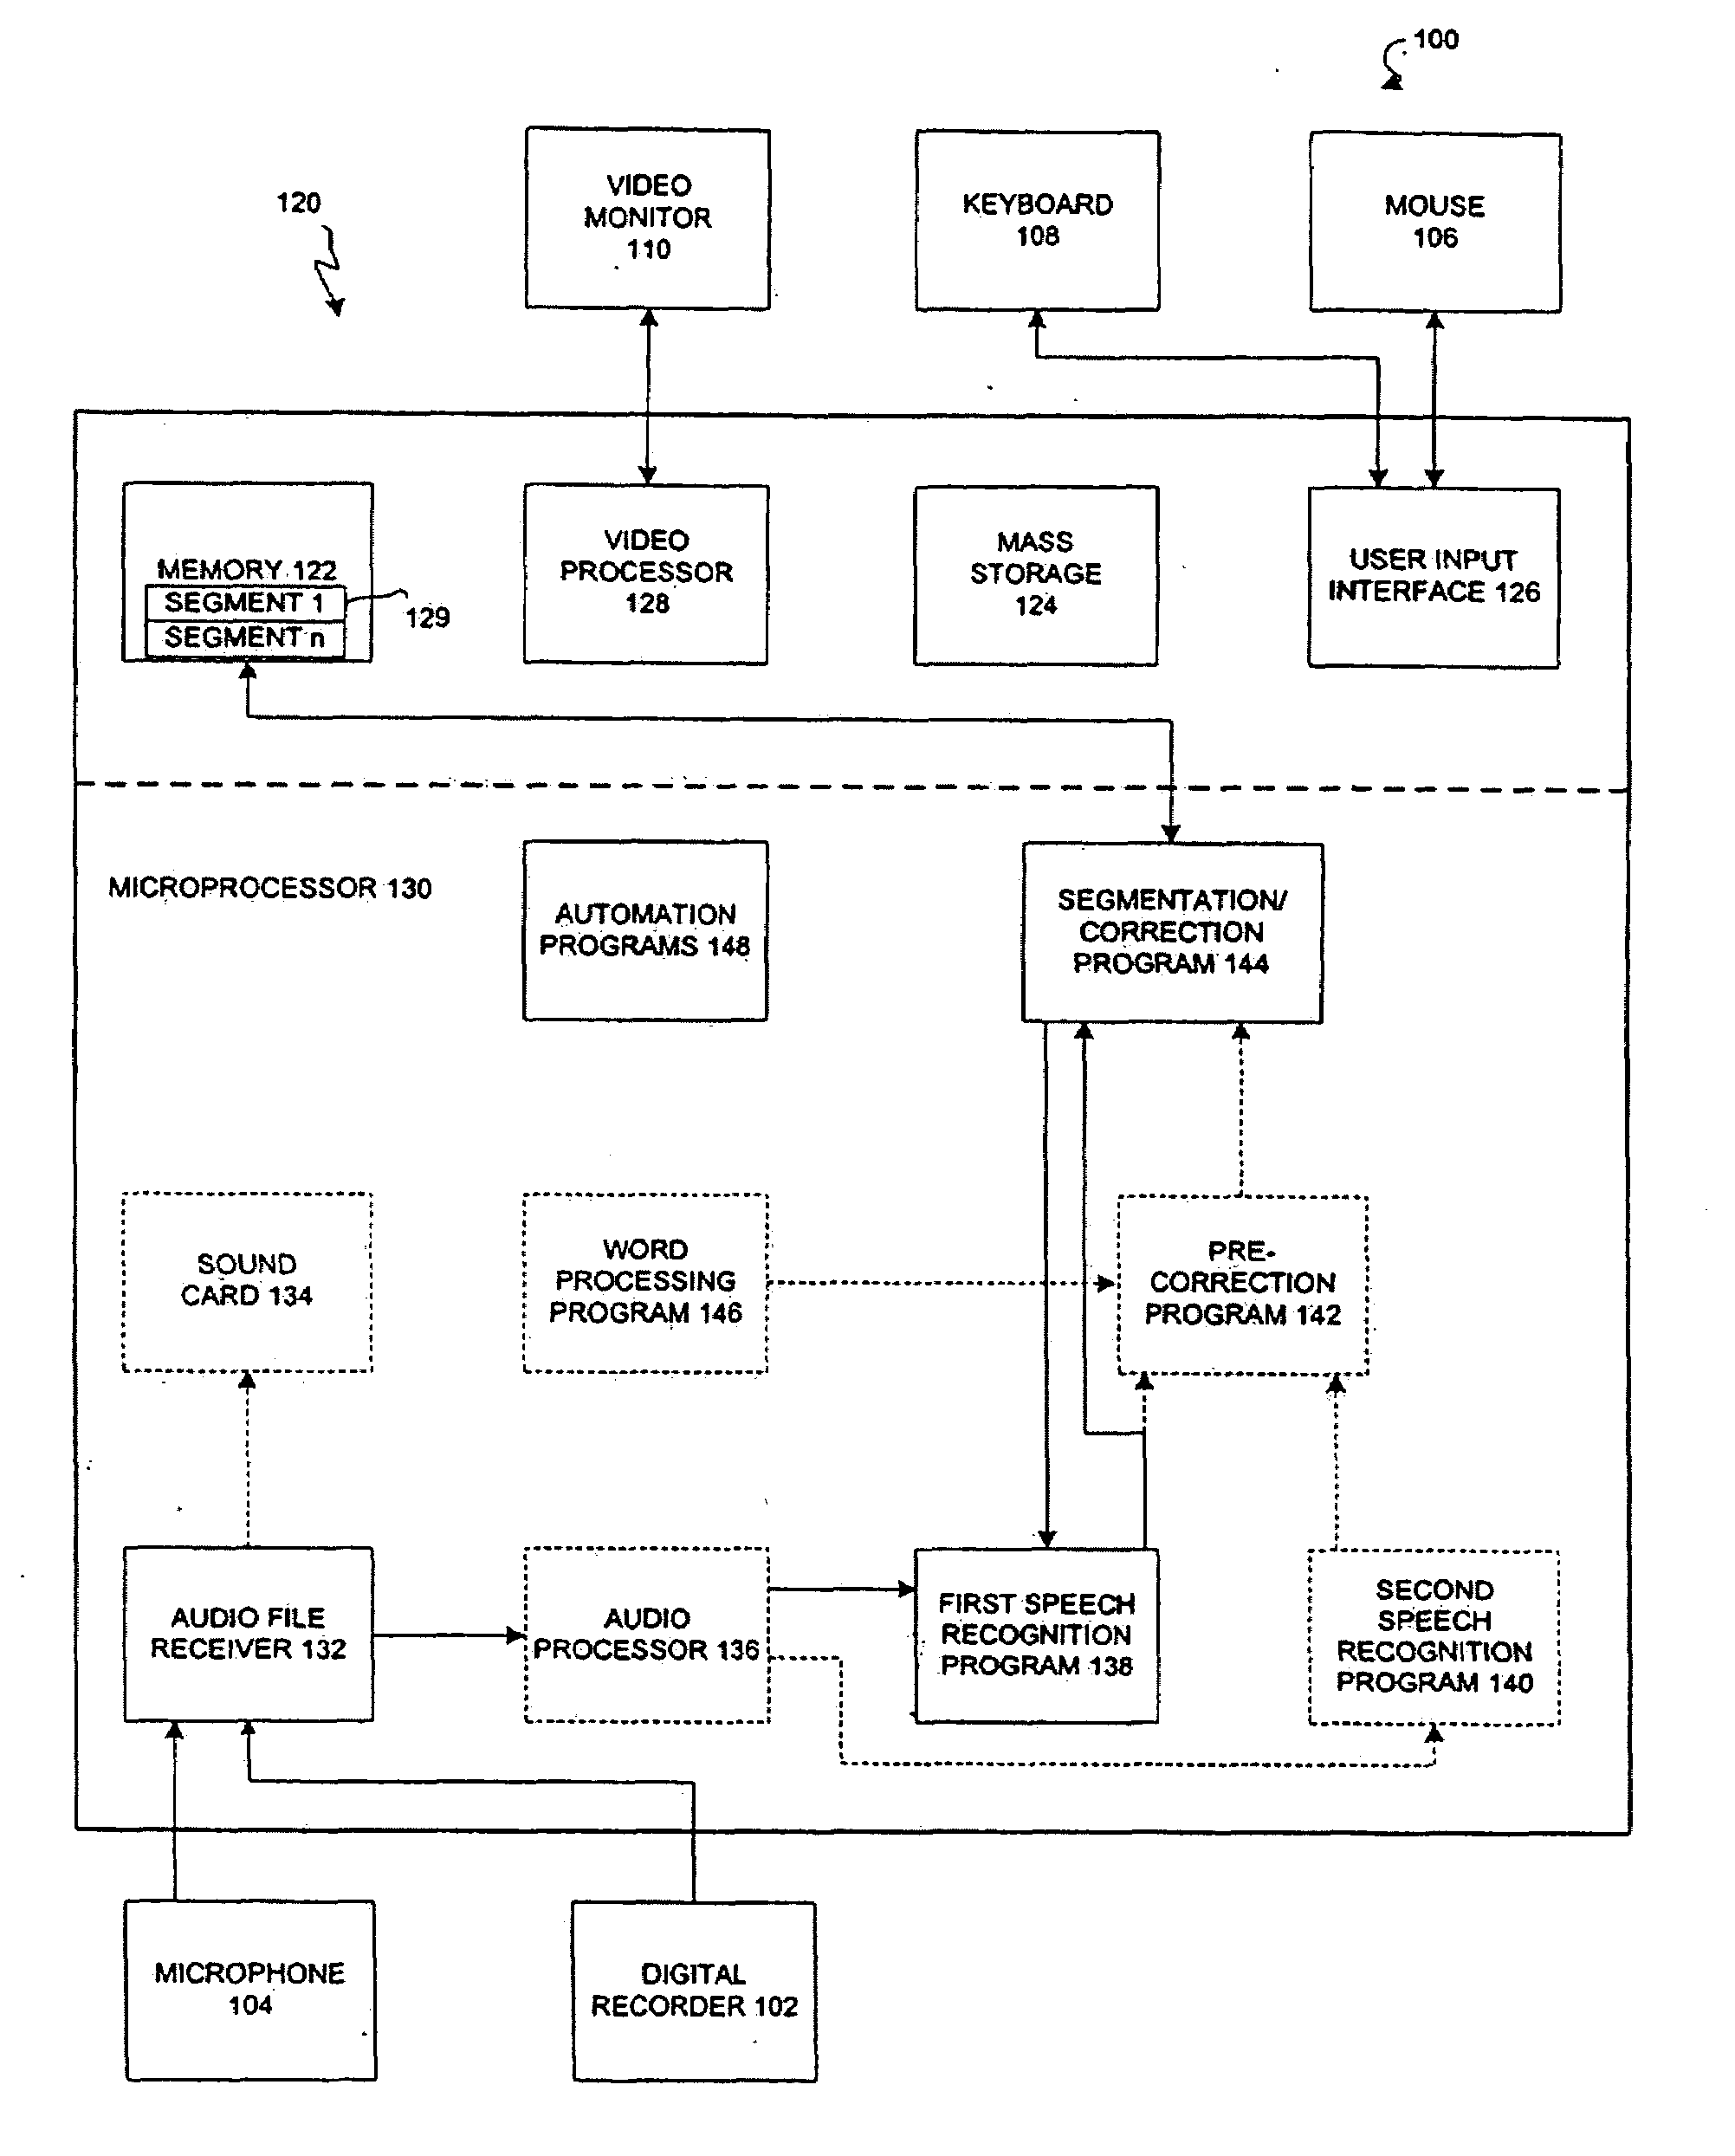 Method for locating an audio segment within an audio file